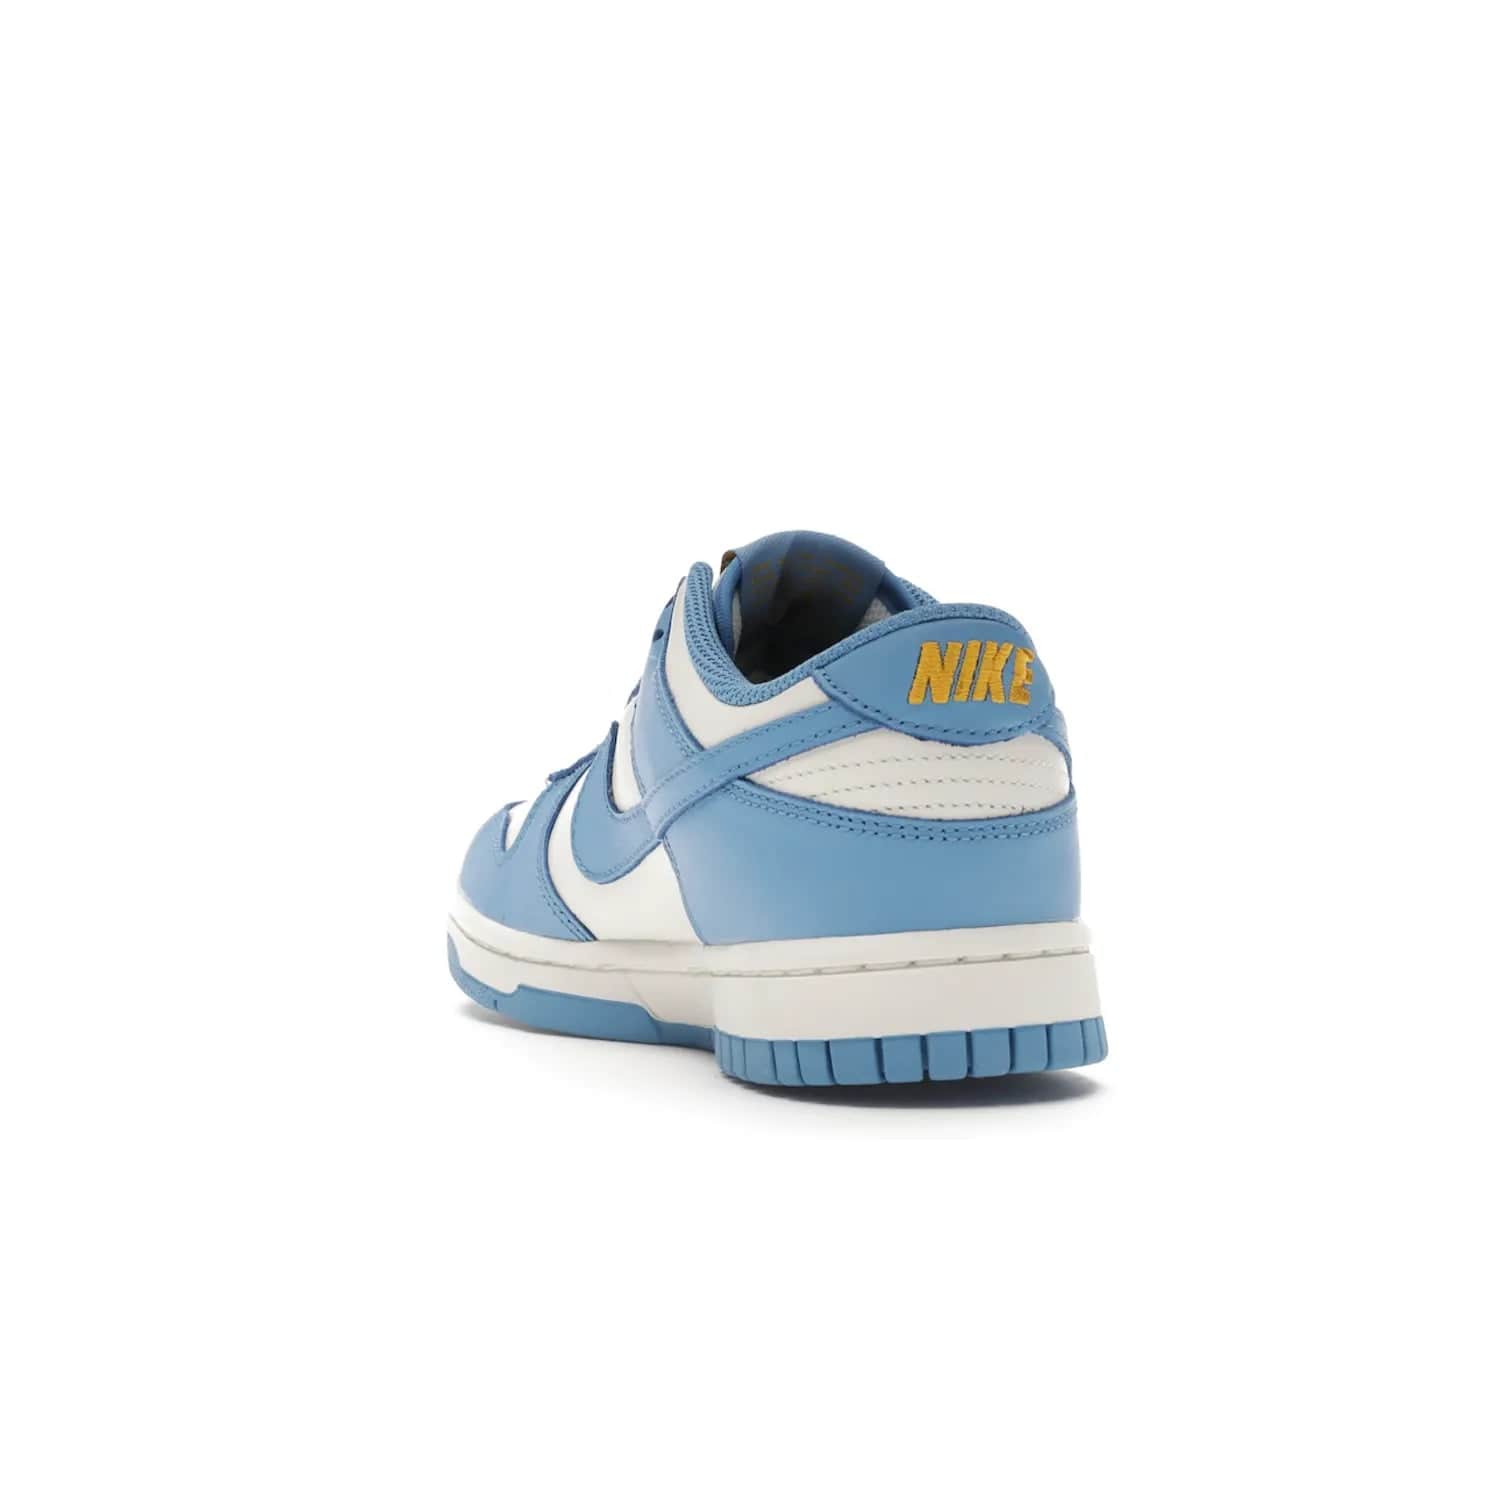 Nike Dunk Low Coast (Women's) - Image 26 - Only at www.BallersClubKickz.com - Iconic UCLA colors honor the west coast with the Nike Dunk Low Coast (Women's), a bold combo of light blue, white and yellow. Light leather upper with white midsole and light EVA outsole offer a modern twist. Released Feb 2021 for $100.